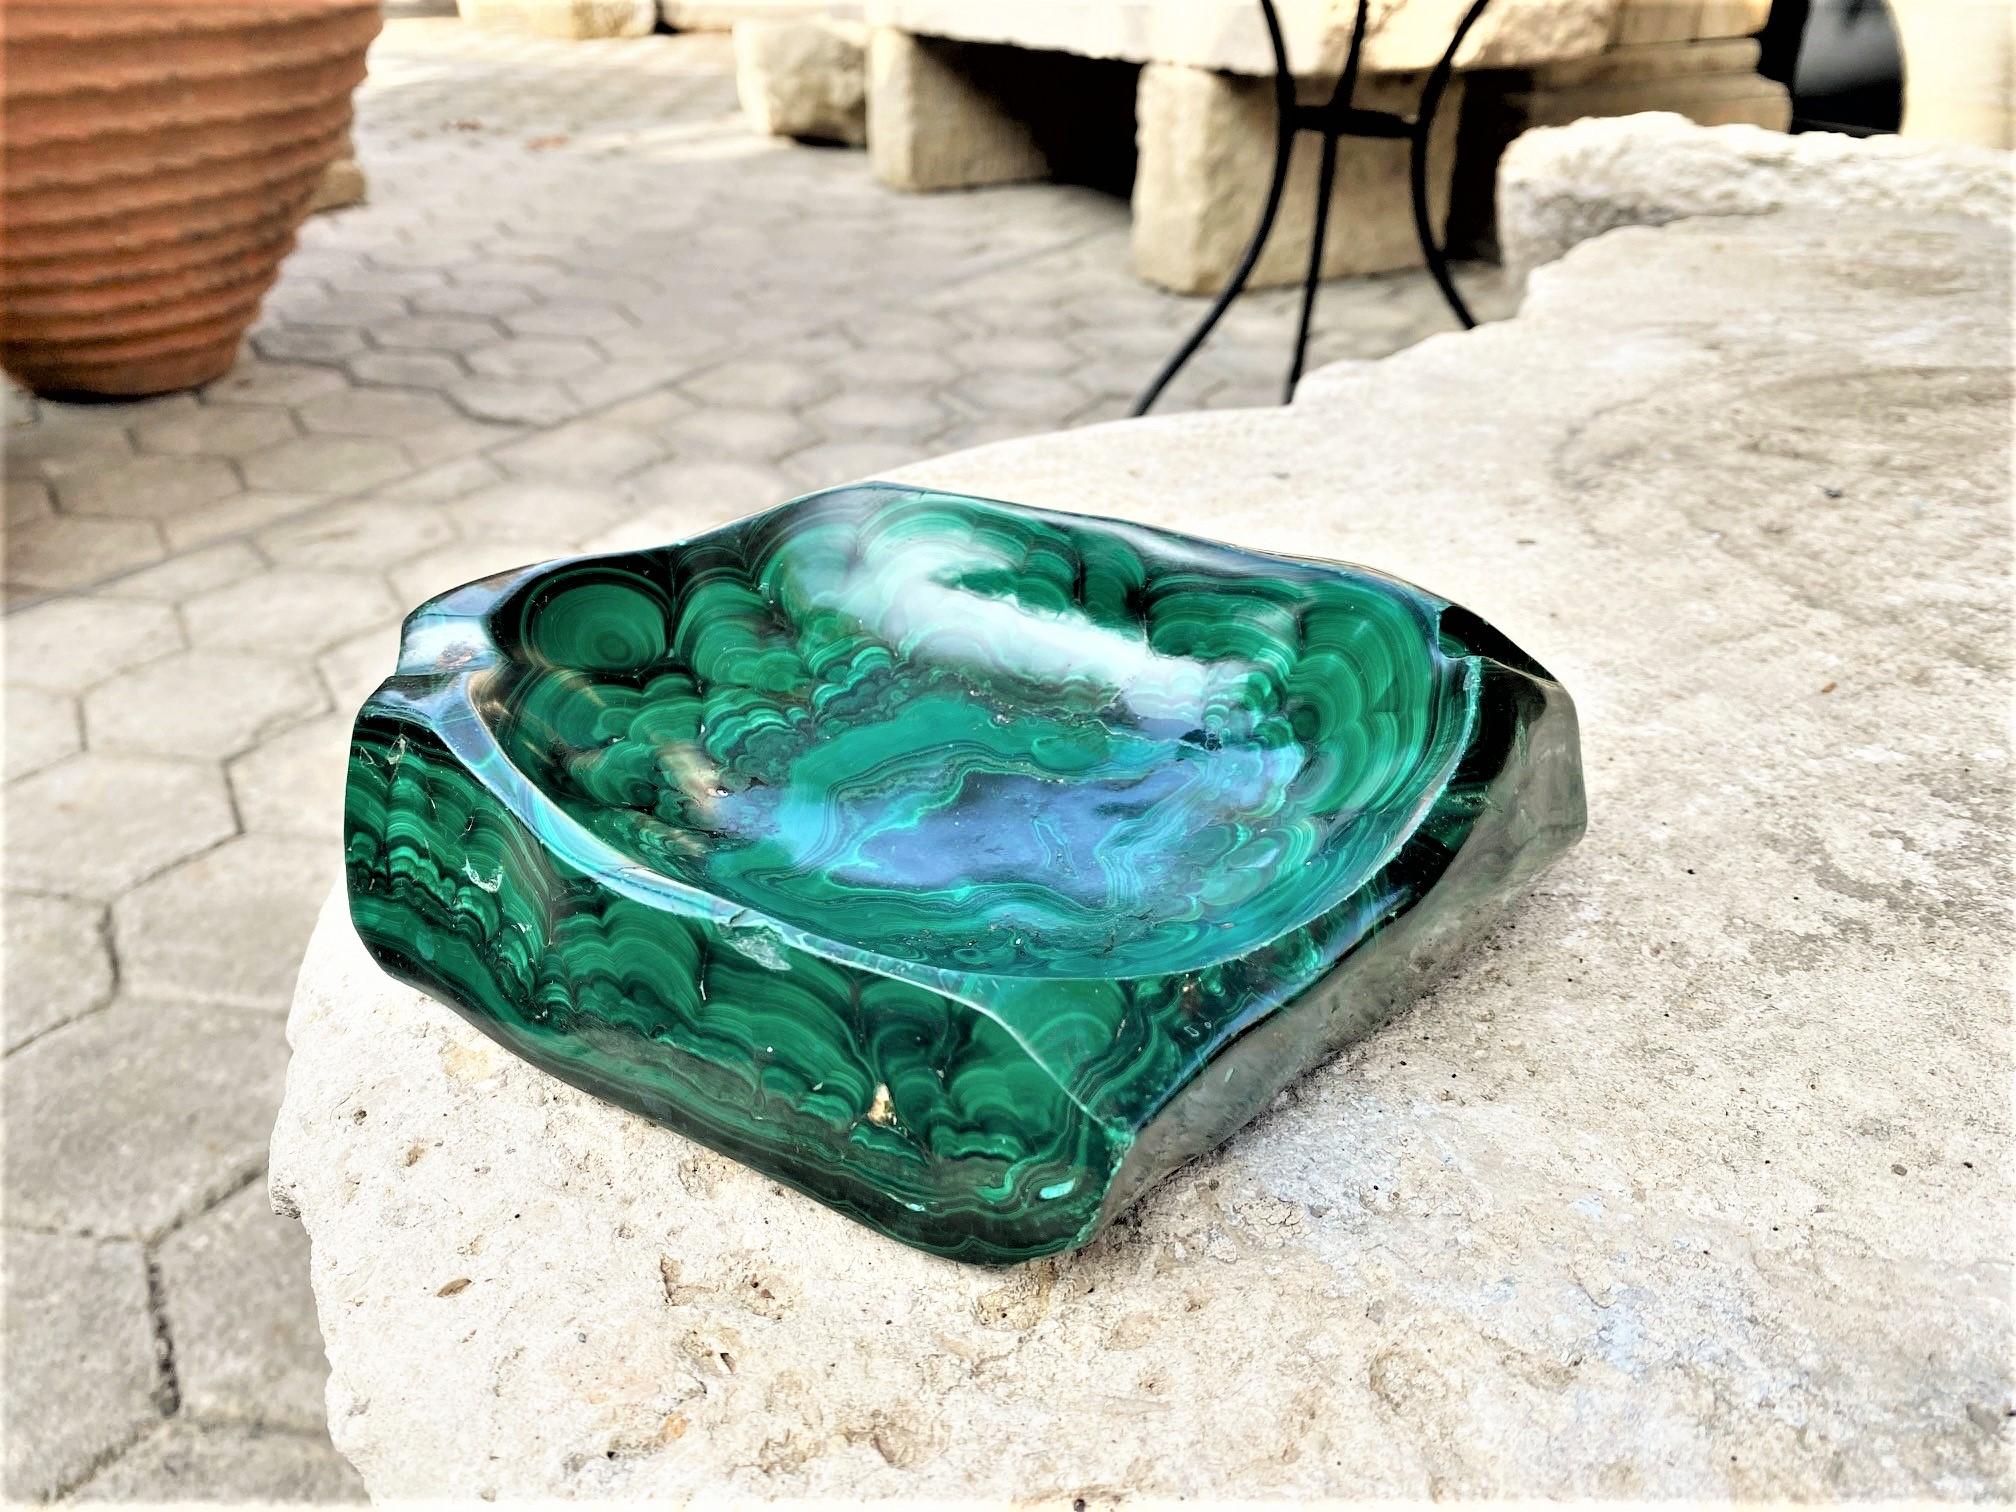 Great and unique shape carved malachite stone ashtray or vide poche. Imposing item, stunning color and pattern which makes it unique . Natural malachite sculpture . Some are called vide poche or ashtray Dresser caddy or valet tray and sundries bowl